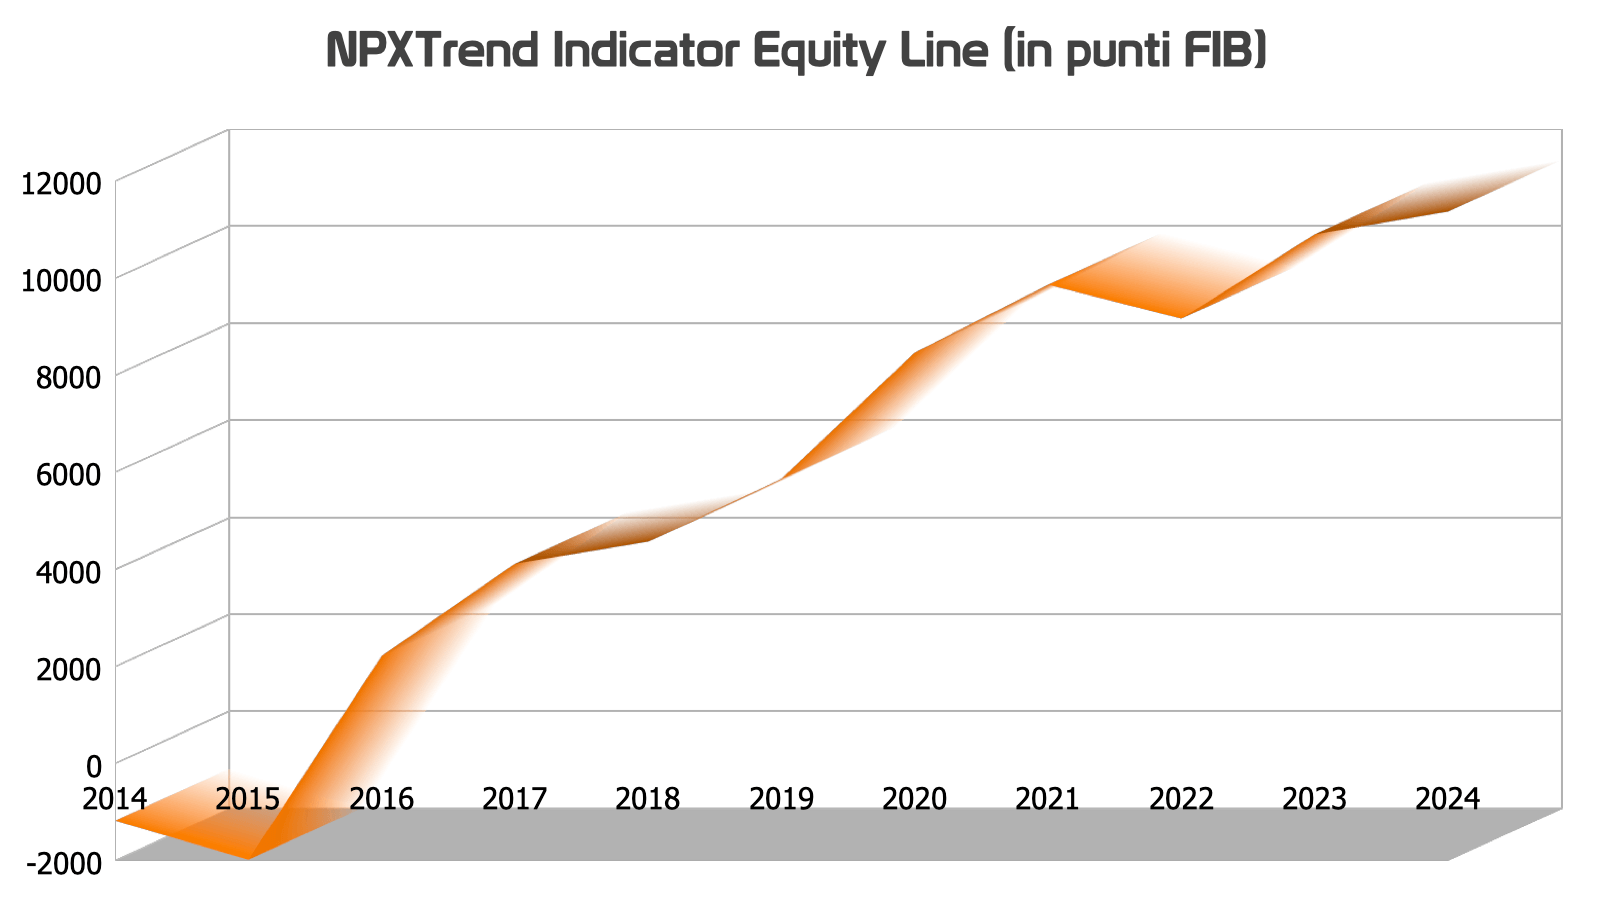 NPXTrend Indicator Equity Line (in punti FIB)